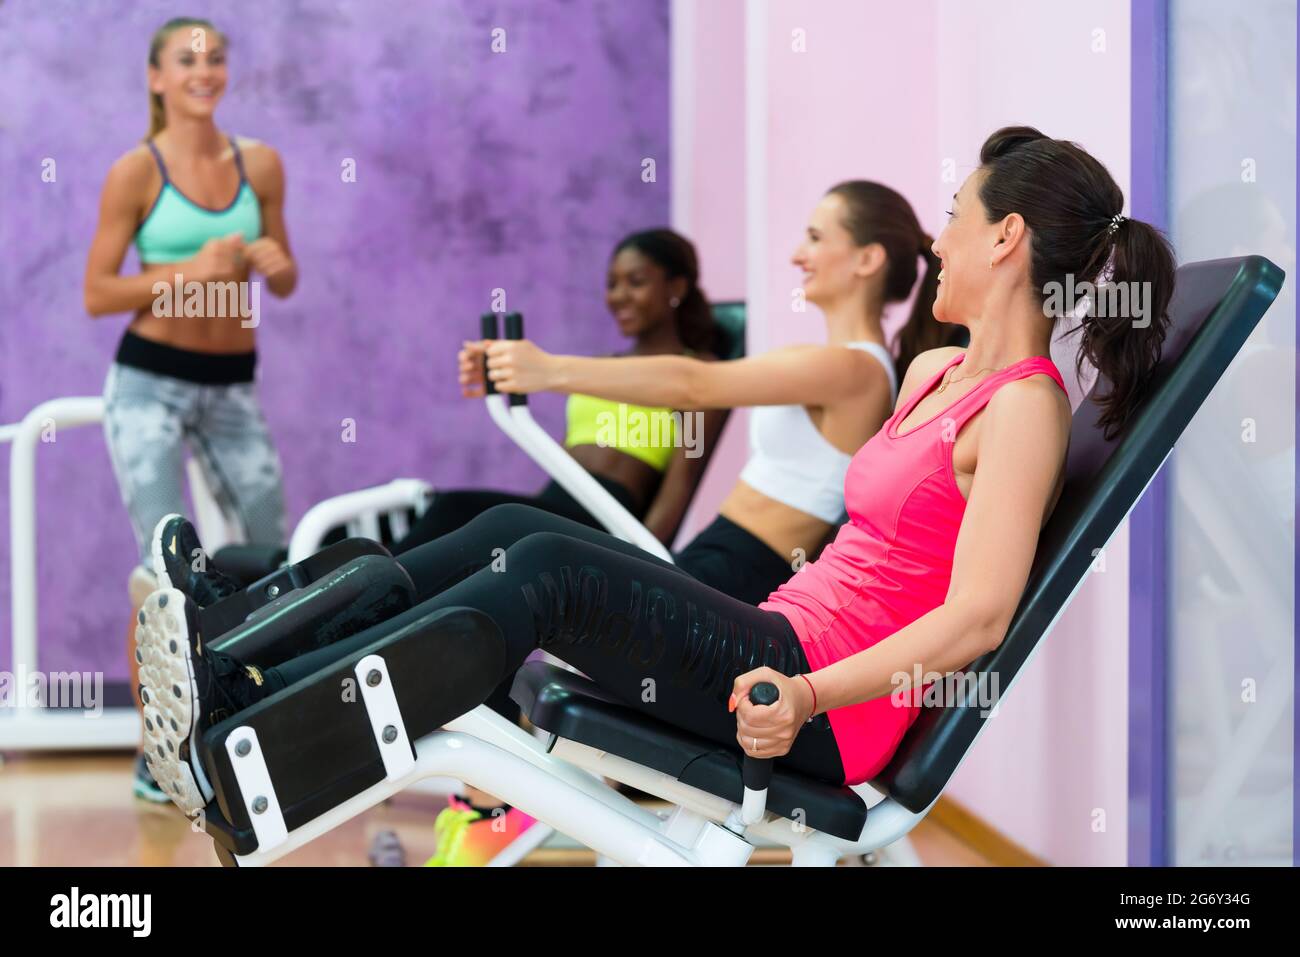 Full length side view of a fit woman laughing while listening to the instructions of a qualified fitness instructor, with sense of humor during group Stock Photo